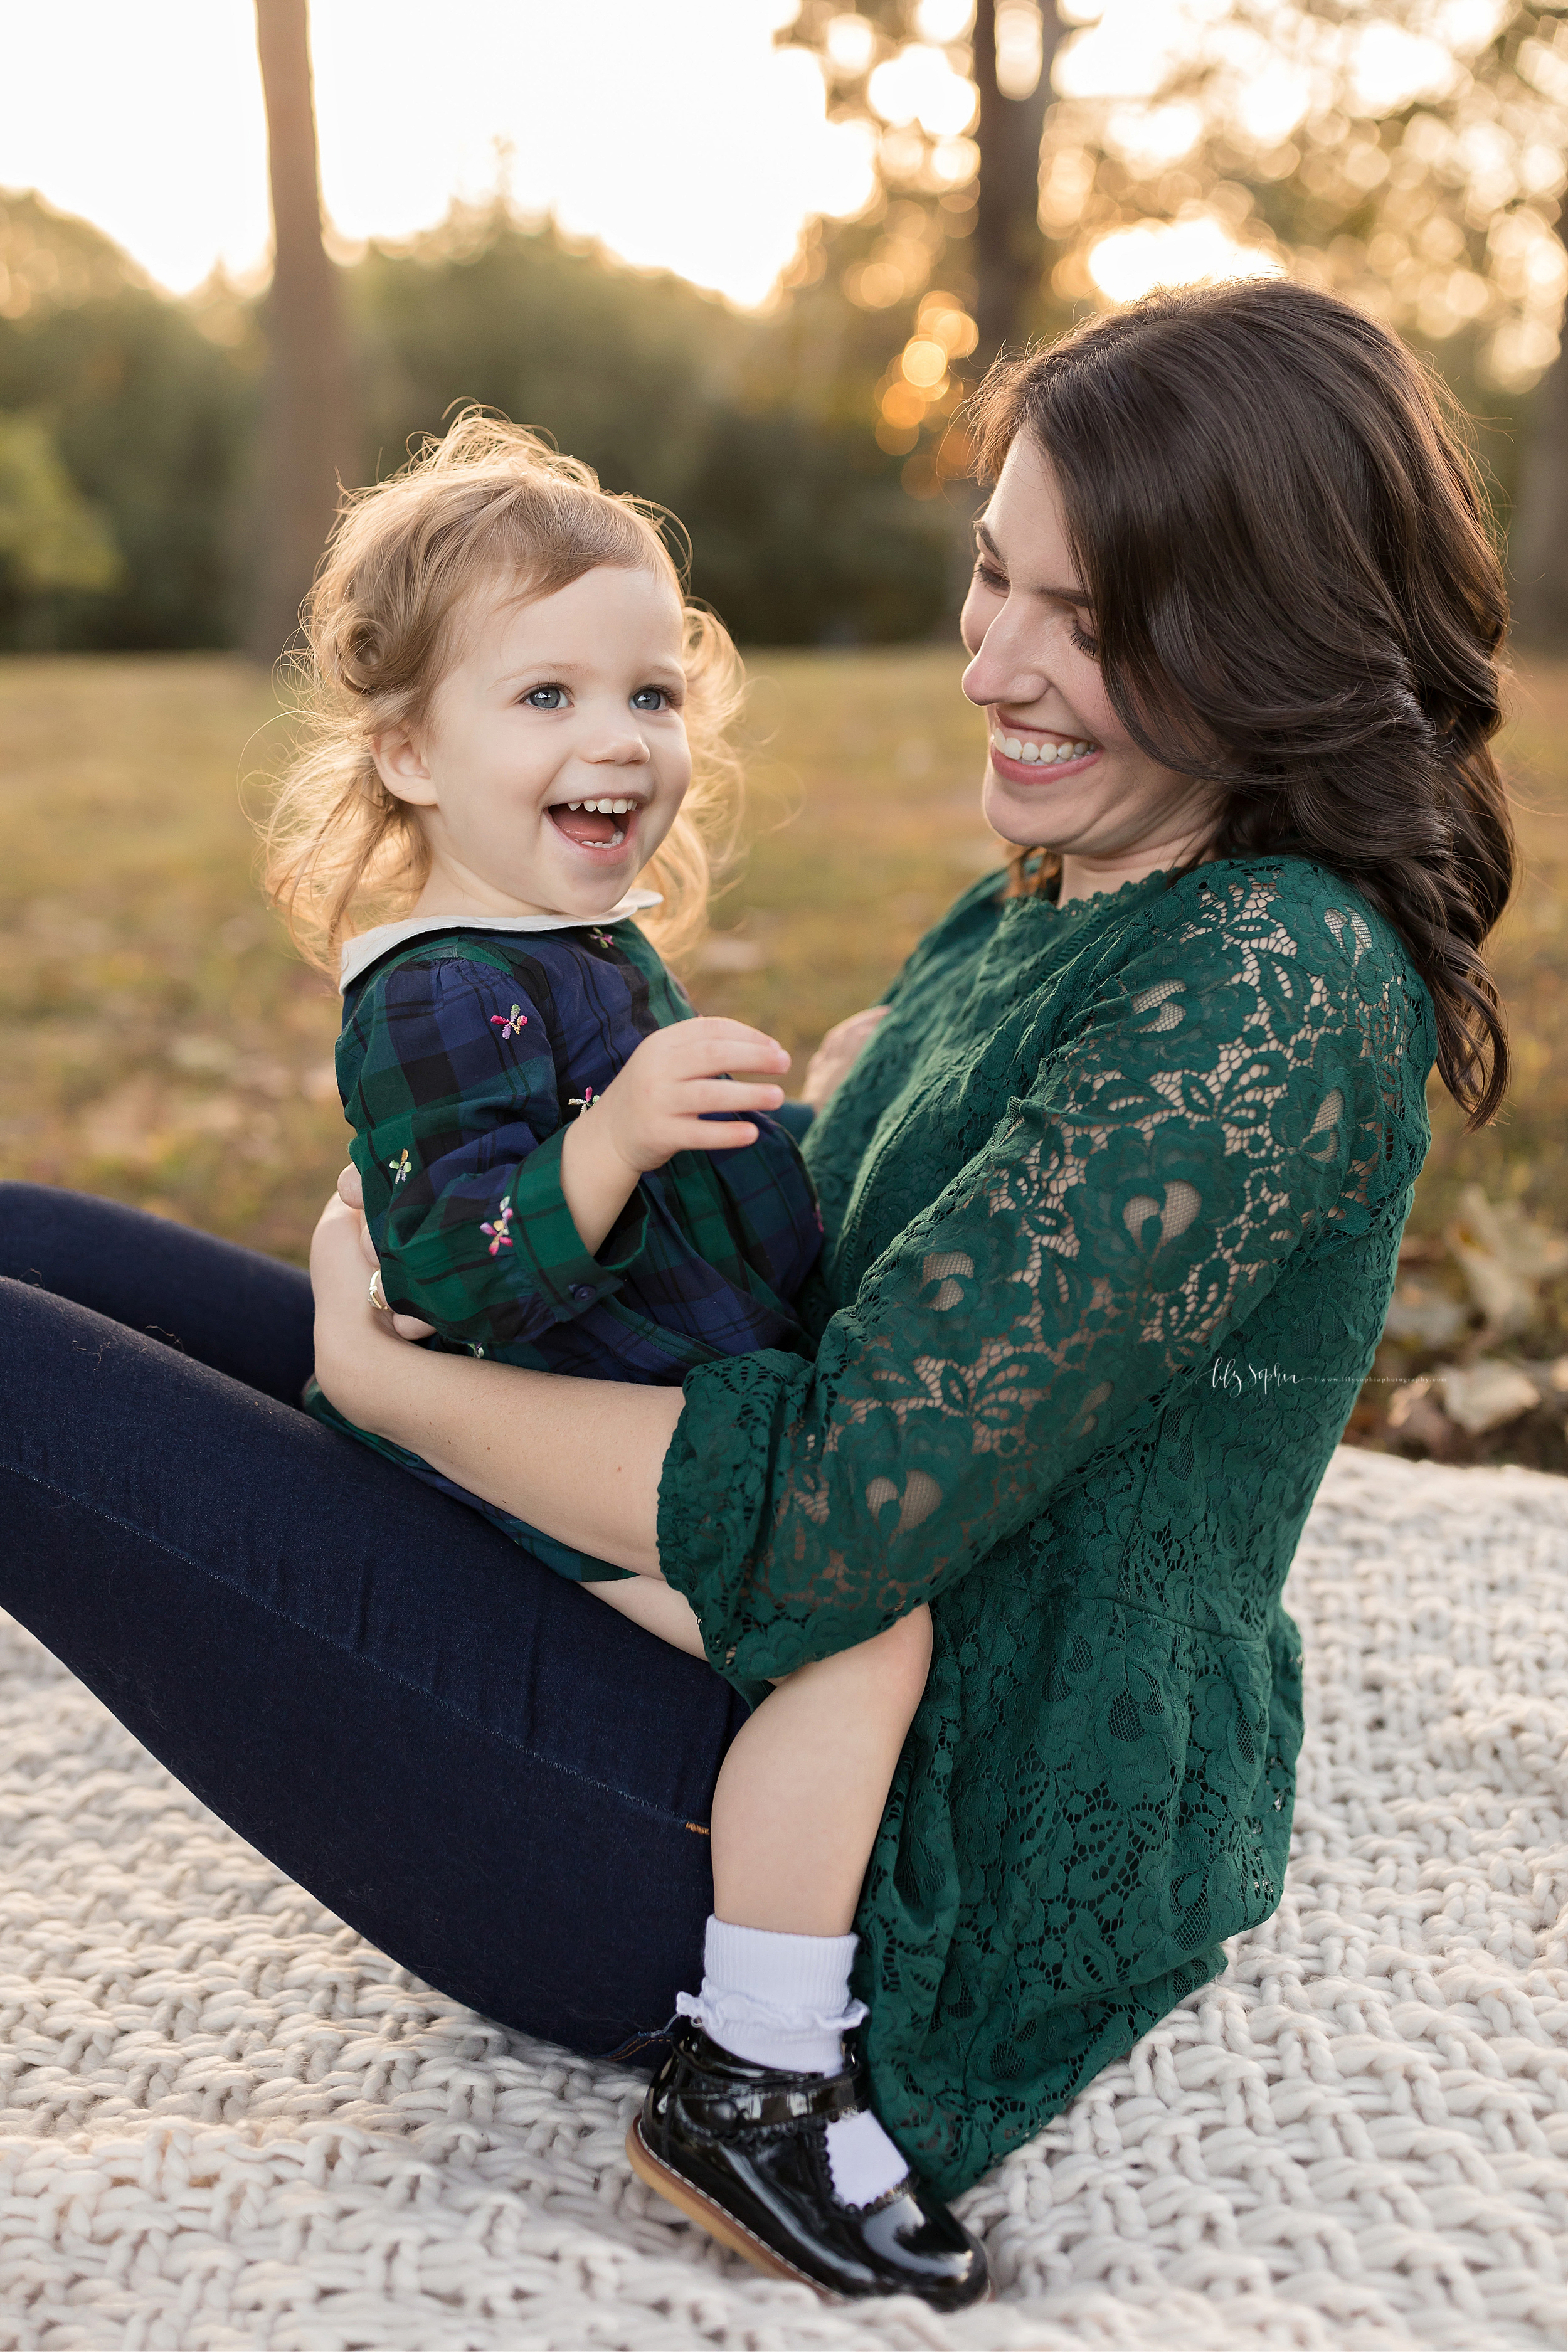 atlanta-buckhead-brookhaven-decatur-lily-sophia-photography-photographer-portraits-grant-park-intown-outdoor-family-sunset-session-toddler-baby-girl_0011.jpg